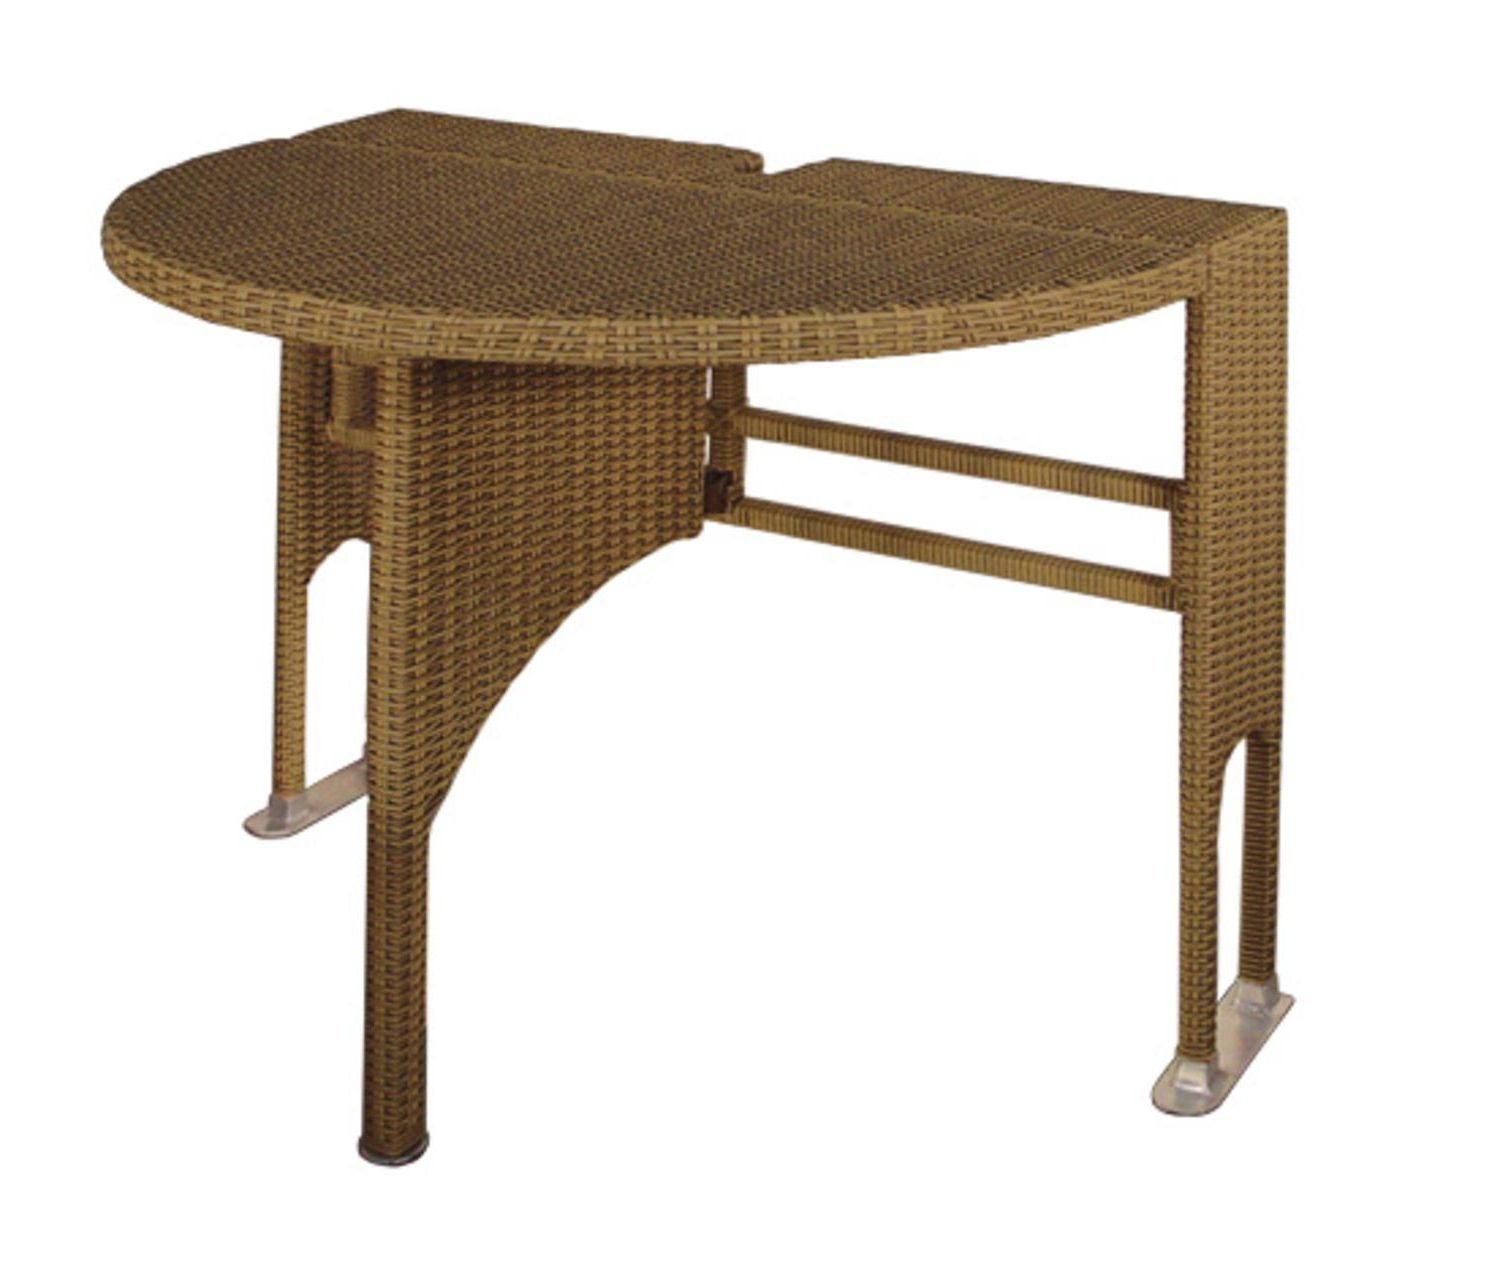 36" Half Round Drop Leaf Gate Leg Coffee Wicker Table Within 2018 Leaf Round Coffee Tables (View 11 of 20)